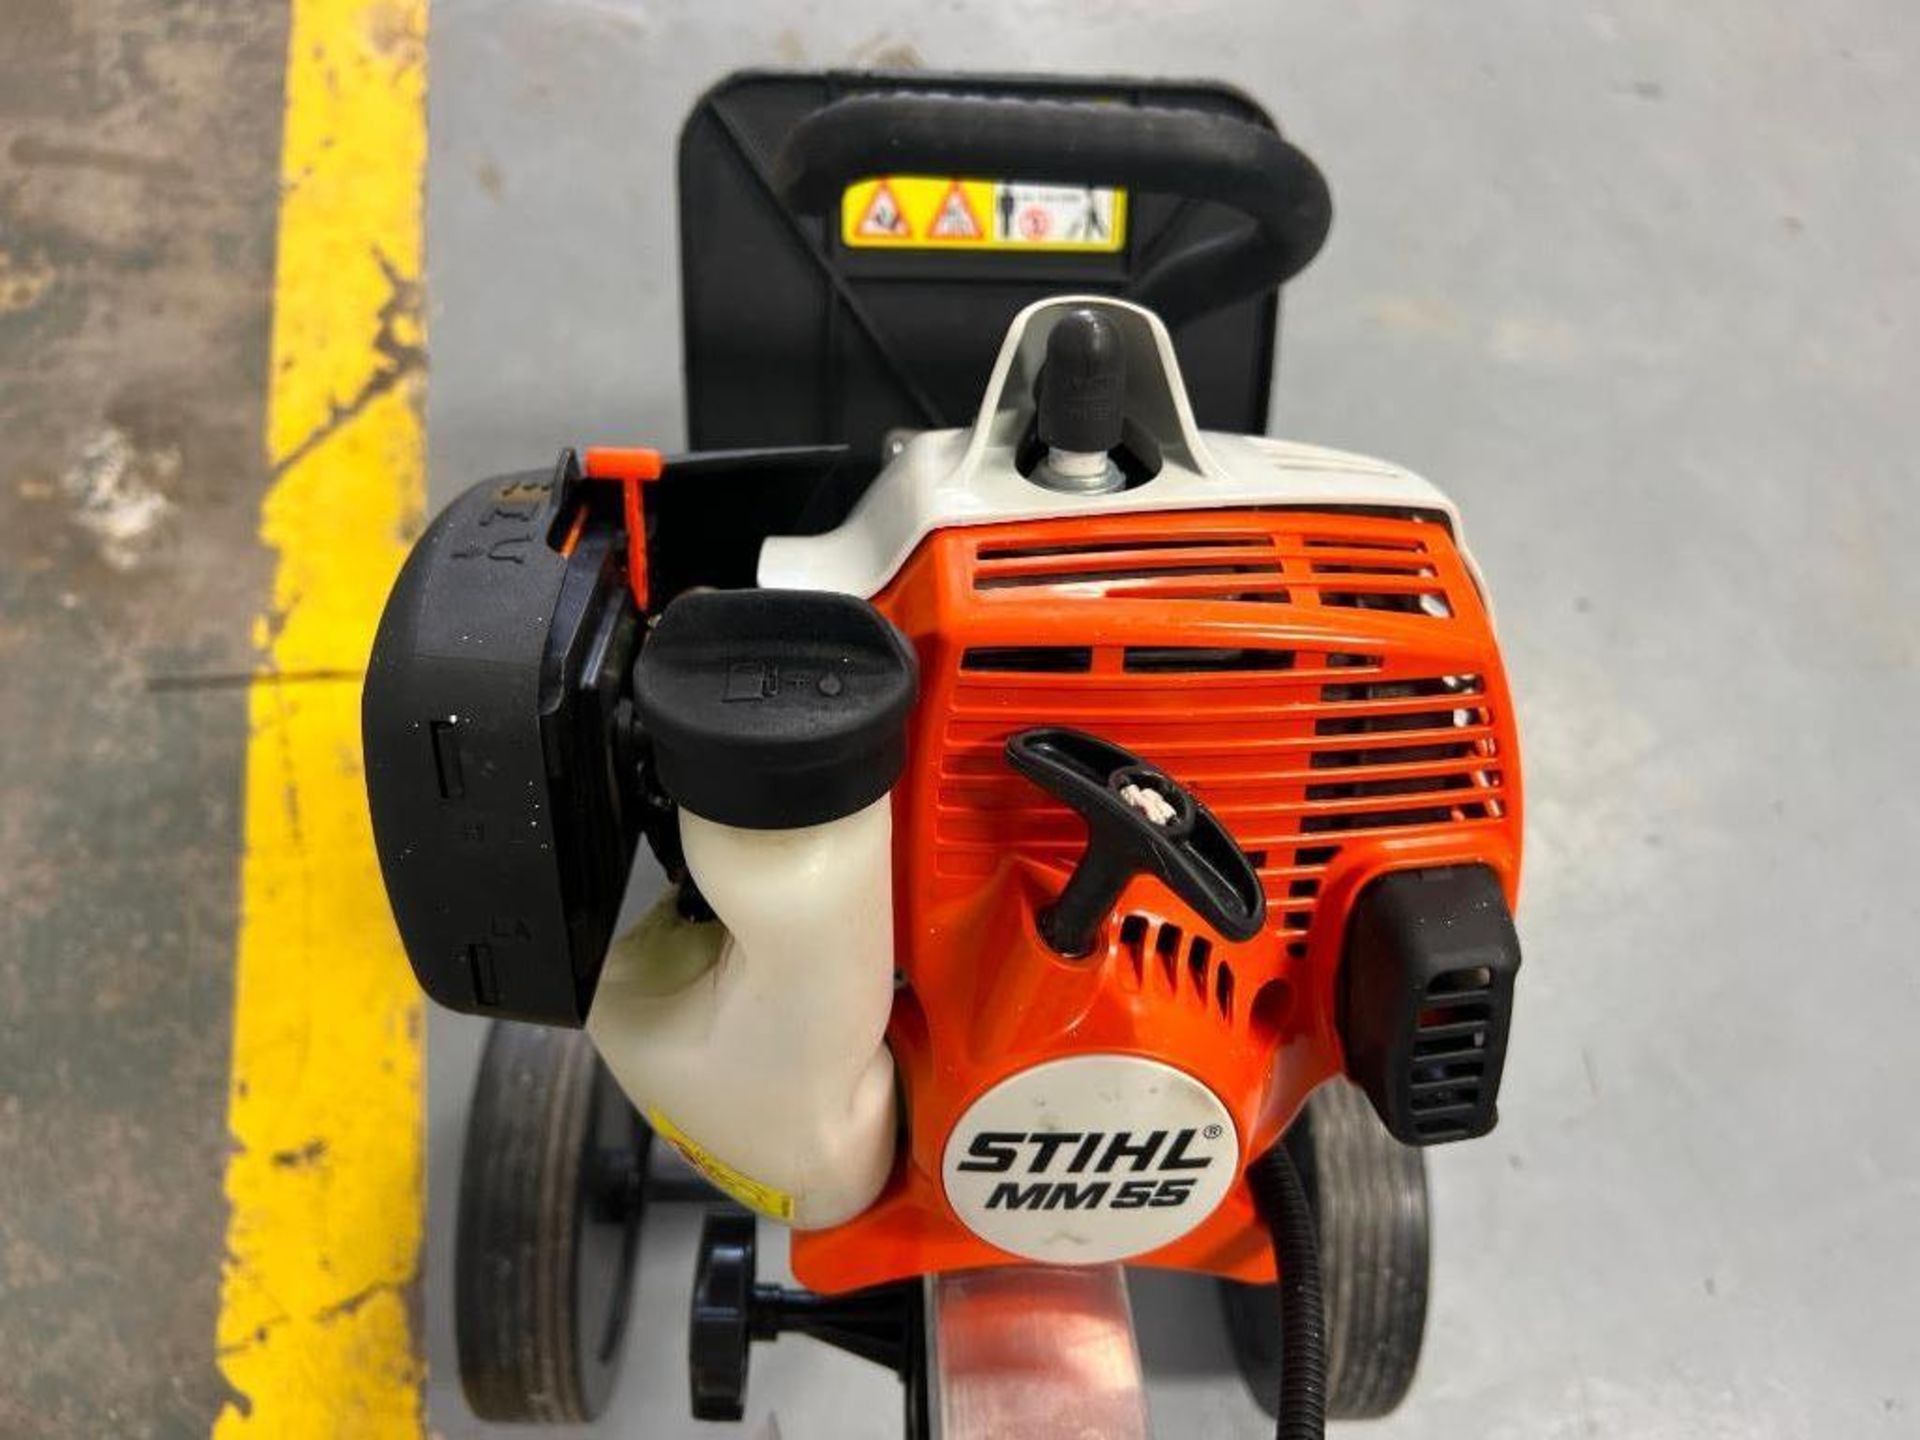 Stihl Yard Boss Cultivator, Model M55, 27.2 cc Engine, Cultivates 8.5" Wide. Located in Mt. Pleasant - Image 3 of 3